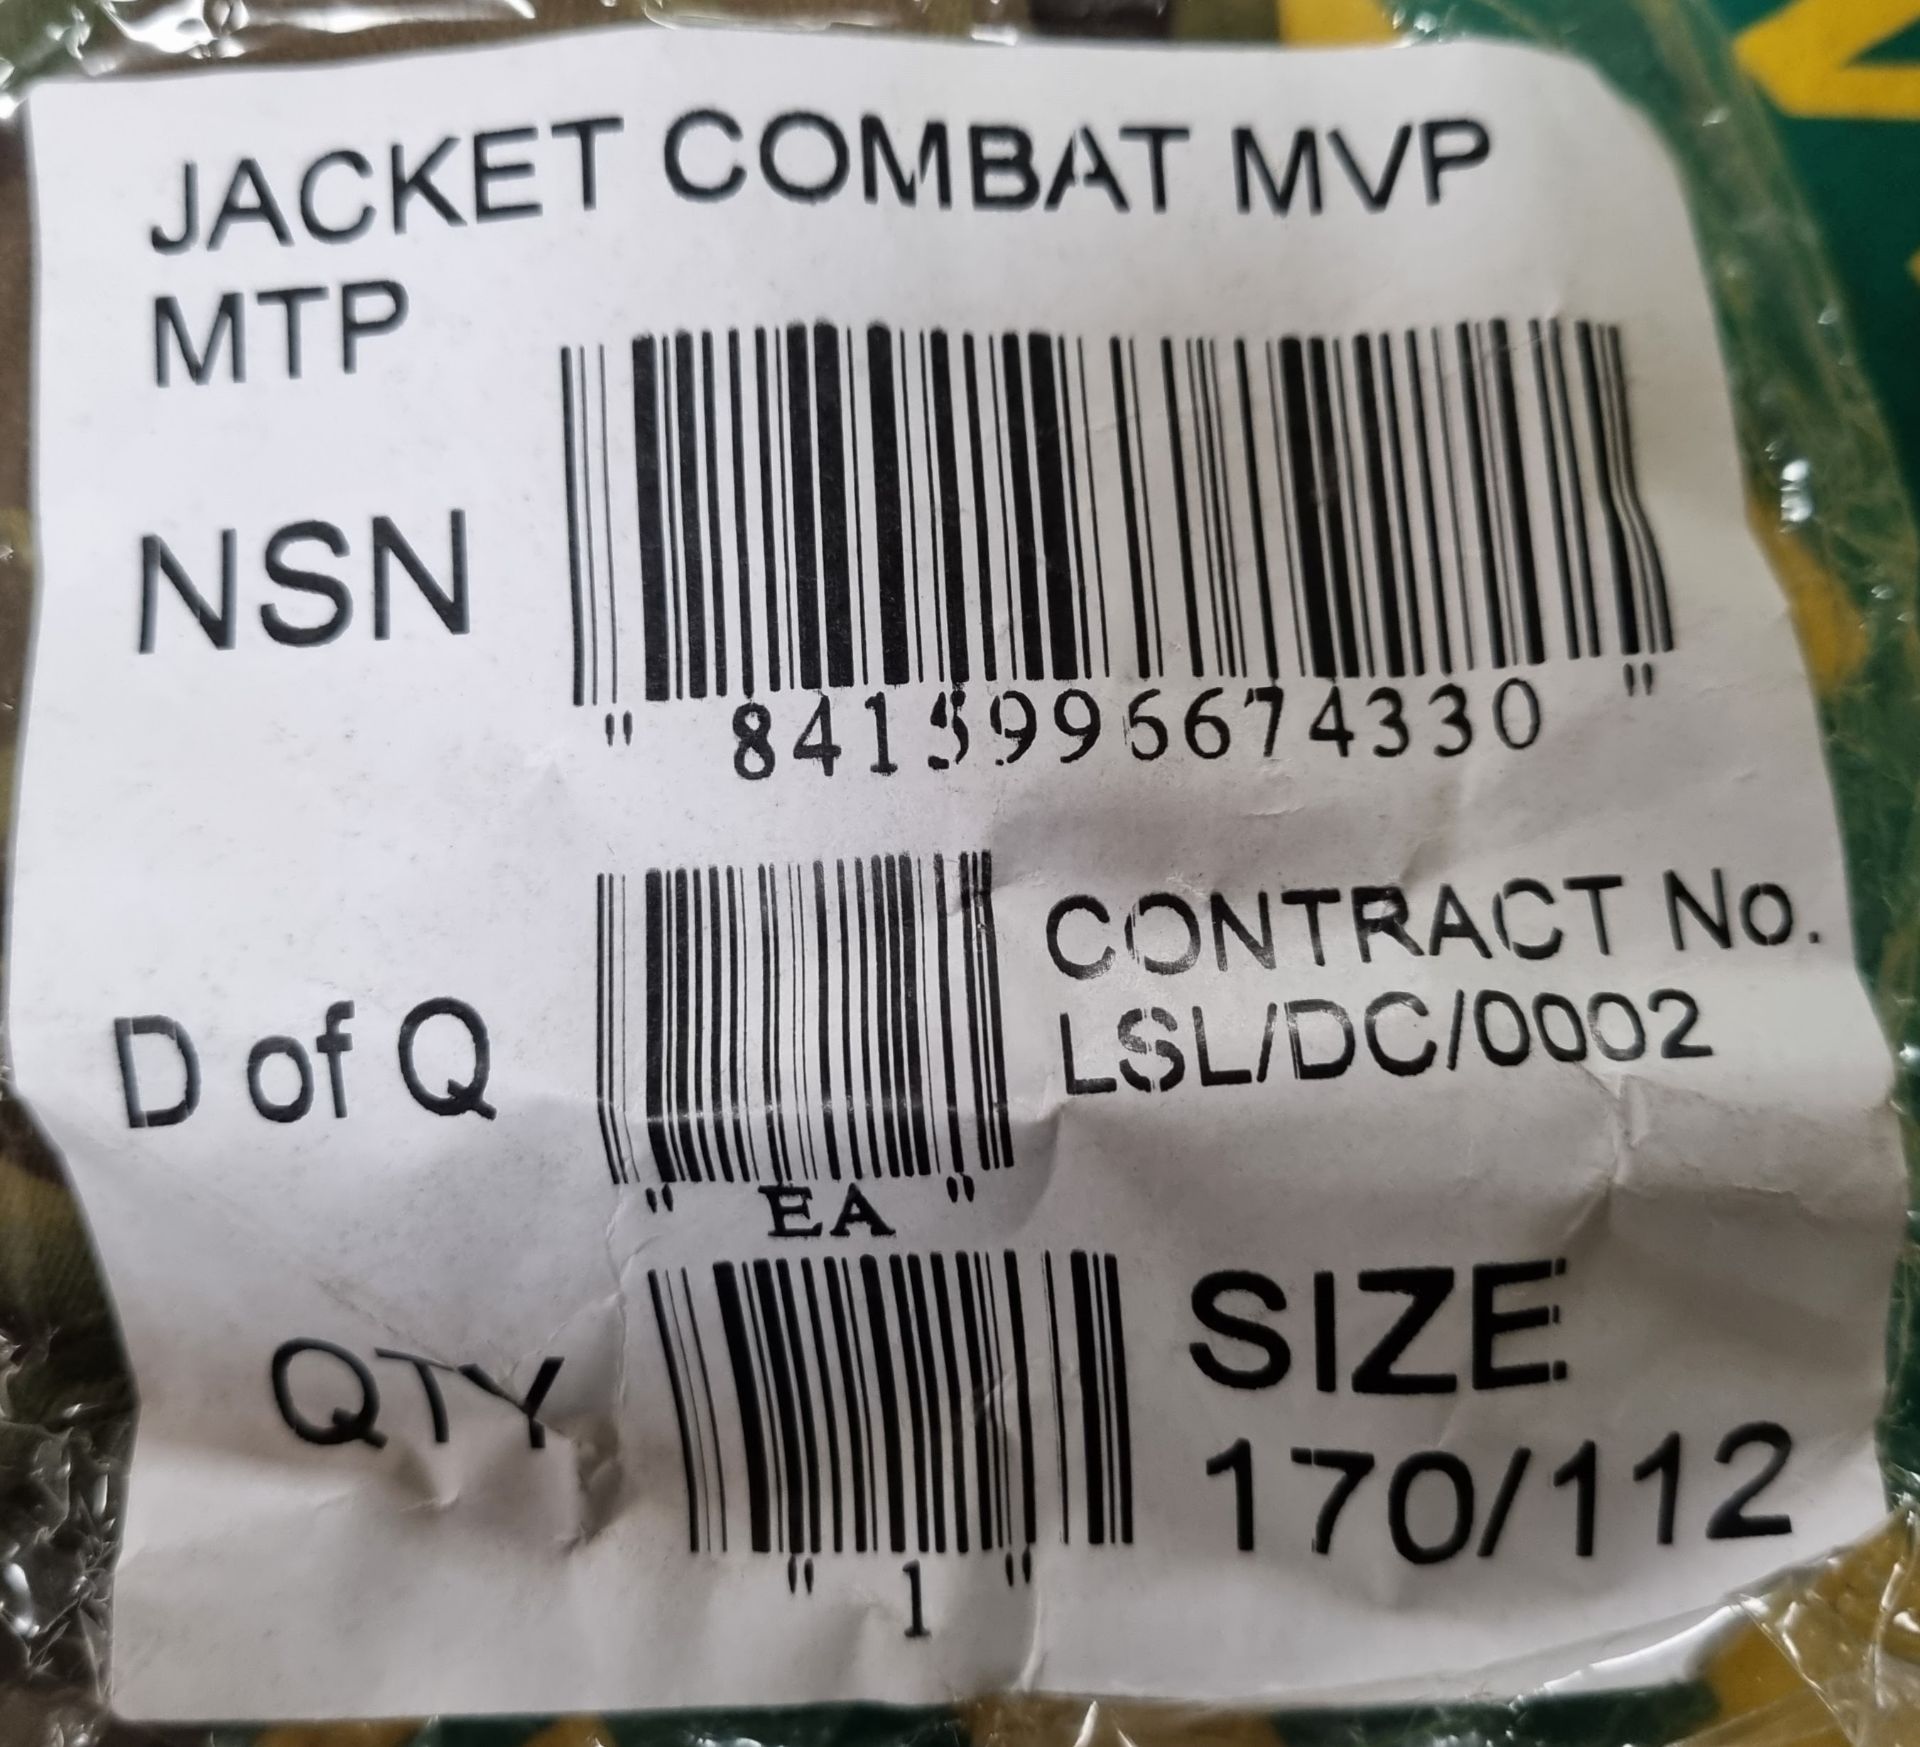 British Army MTP MVP combat jacket - new / packaged - Image 4 of 4